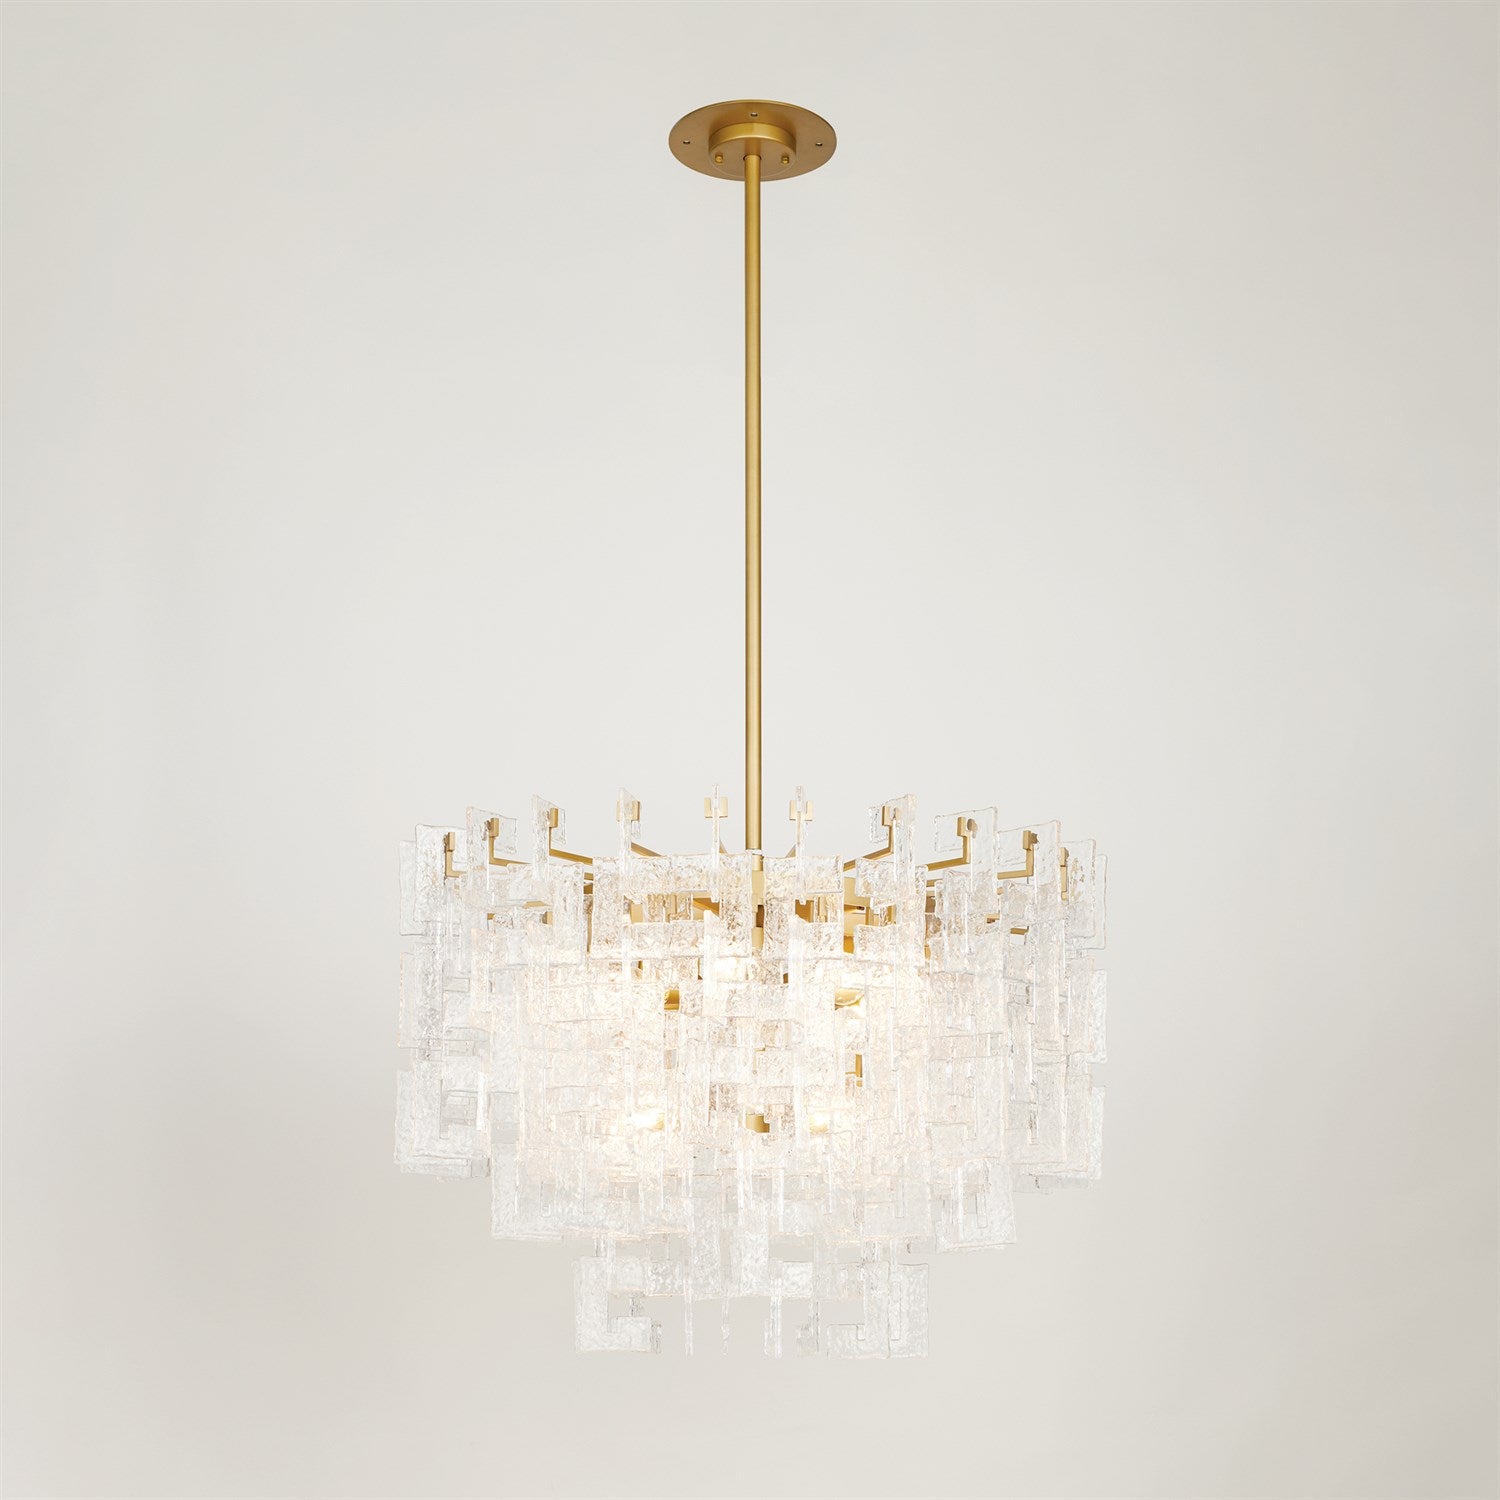 Exposition Chandelier - Brushed Brass Crystal Pendant